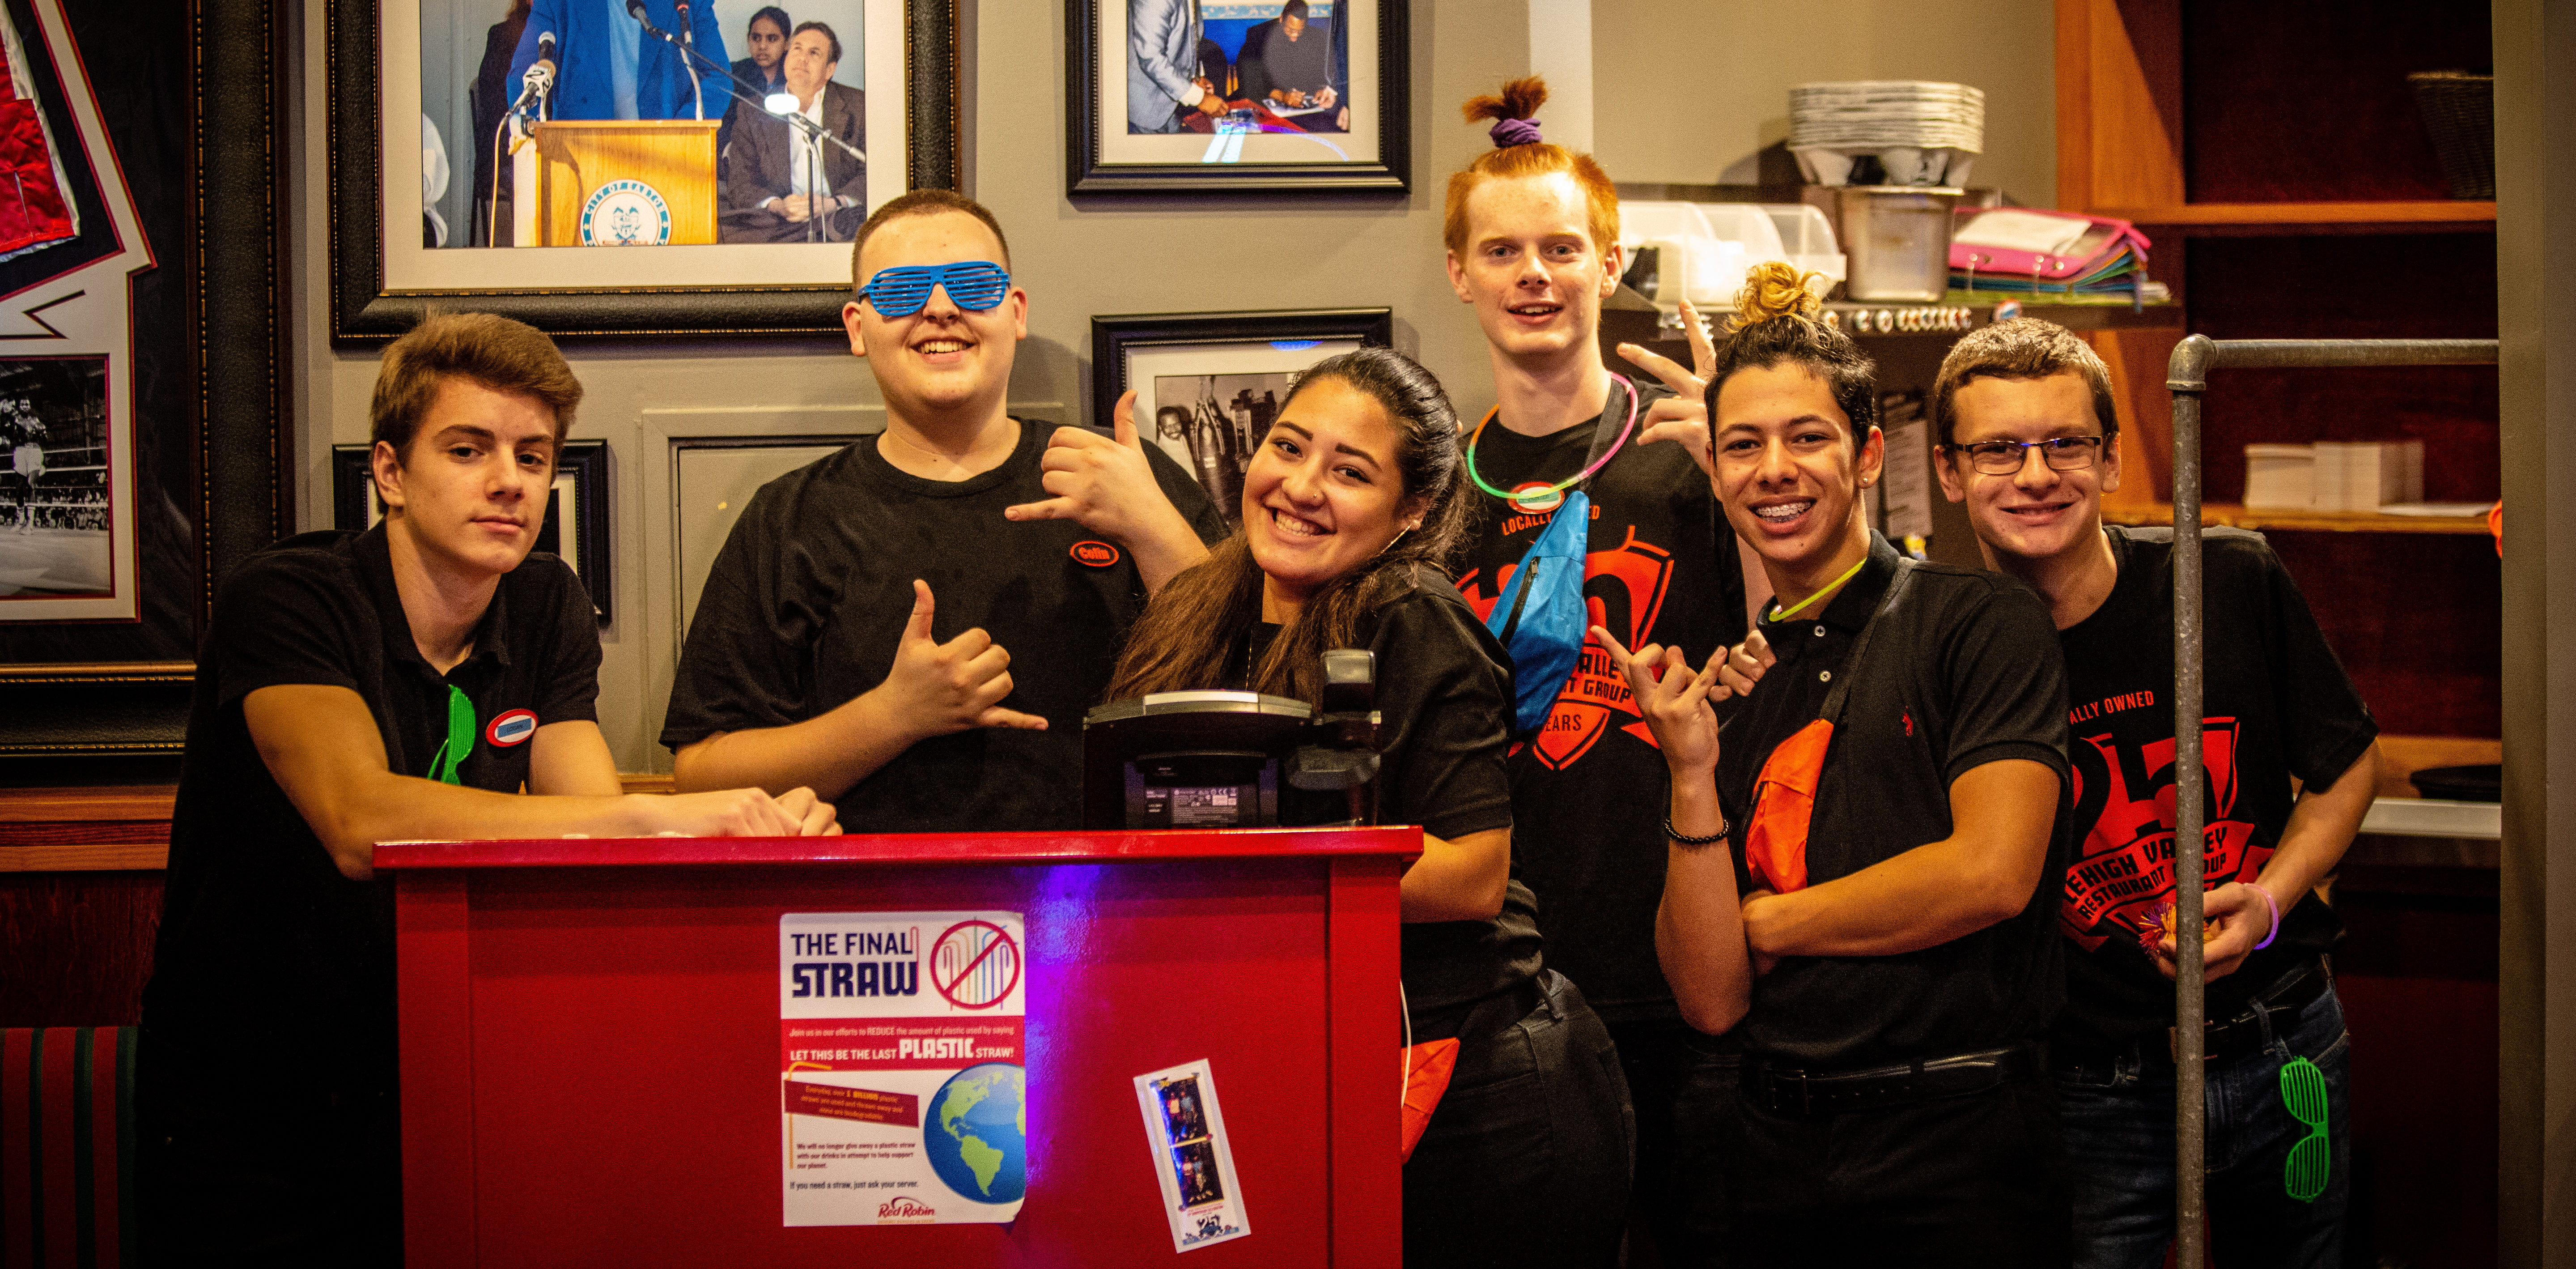 Image of a group of Red Robin Team Members at the host stand in the Northampton Crossings Red Robin location. From the LVRG 25th Anniversary Celebration event.